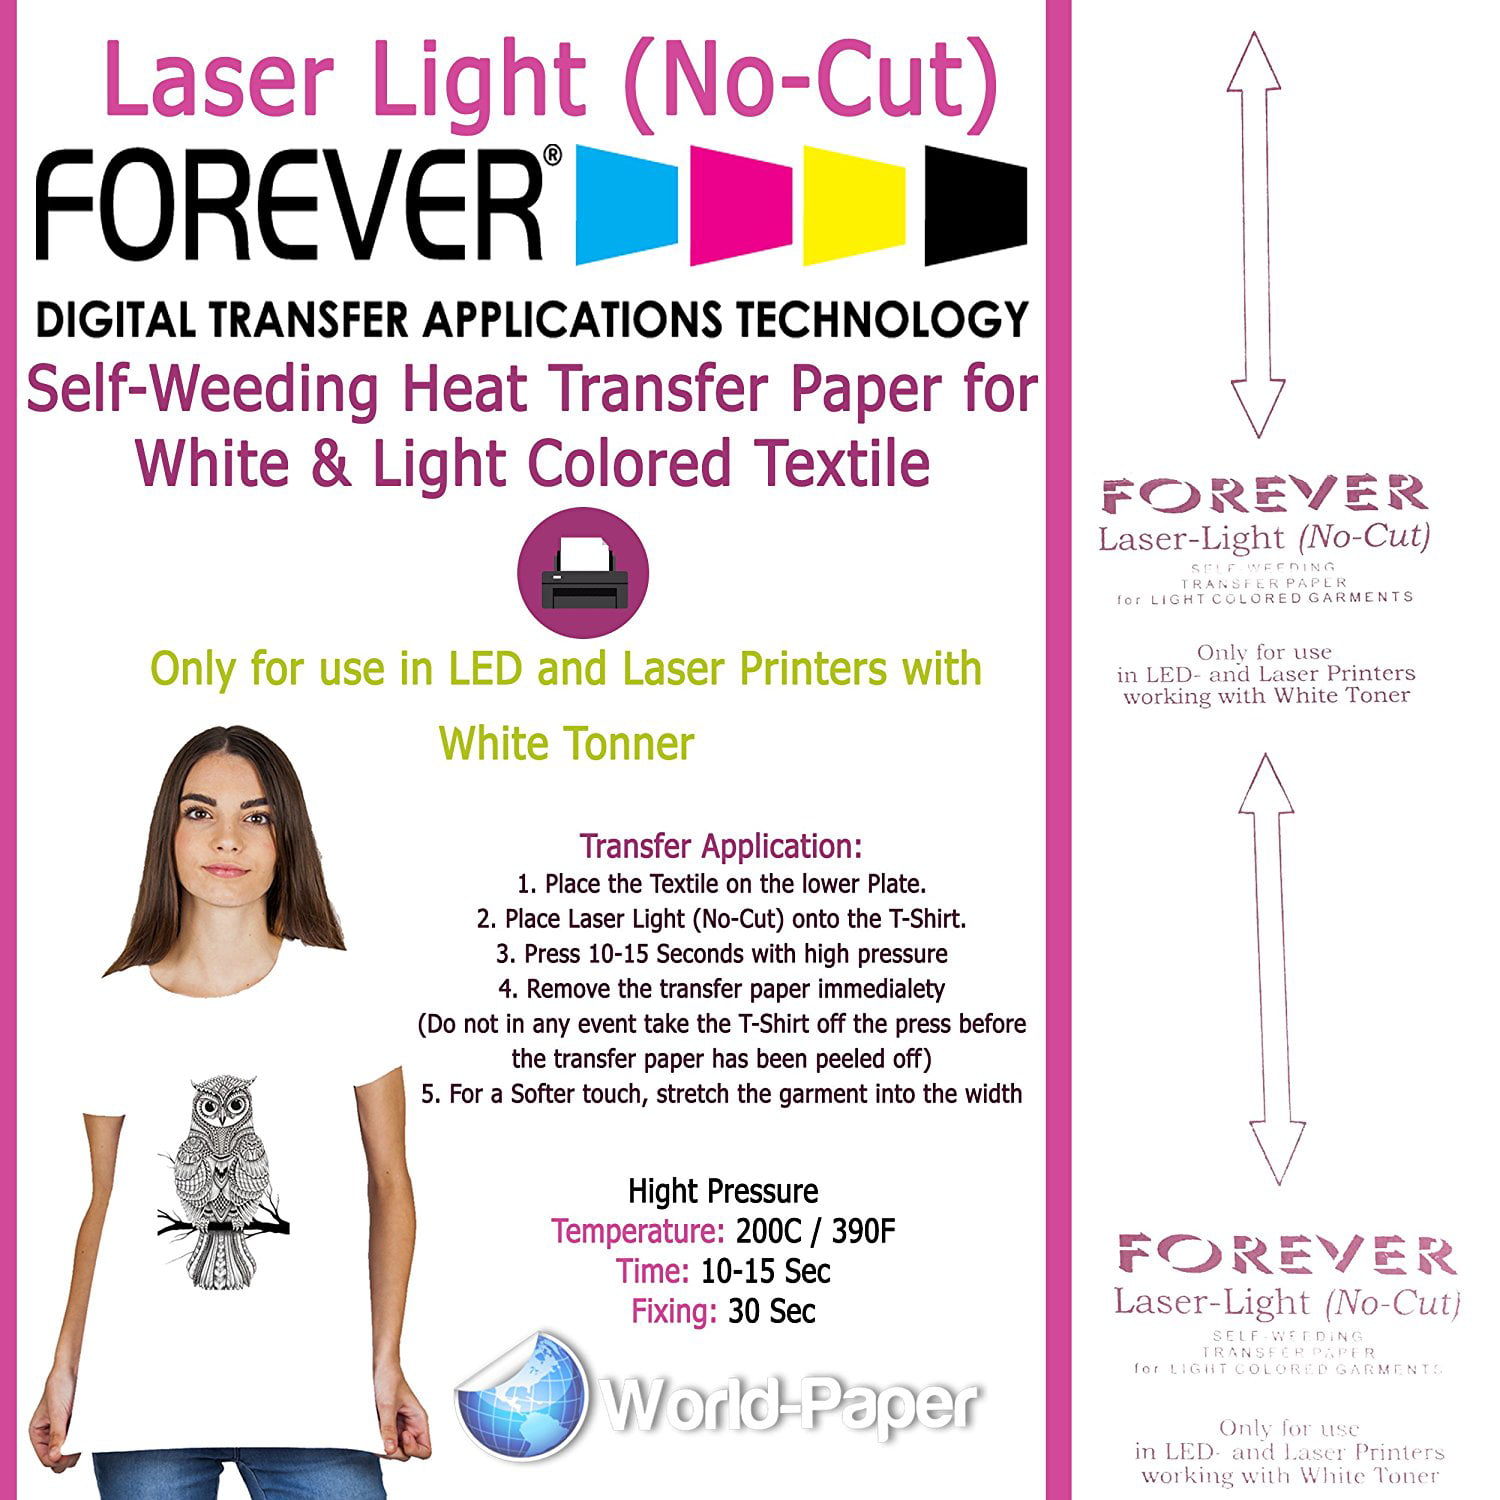 NEENAH "LASER 1 OPAQUE" 8.5"X11" 300 CT LASER TRANSFER PAPER FOR DARK FABRIC 